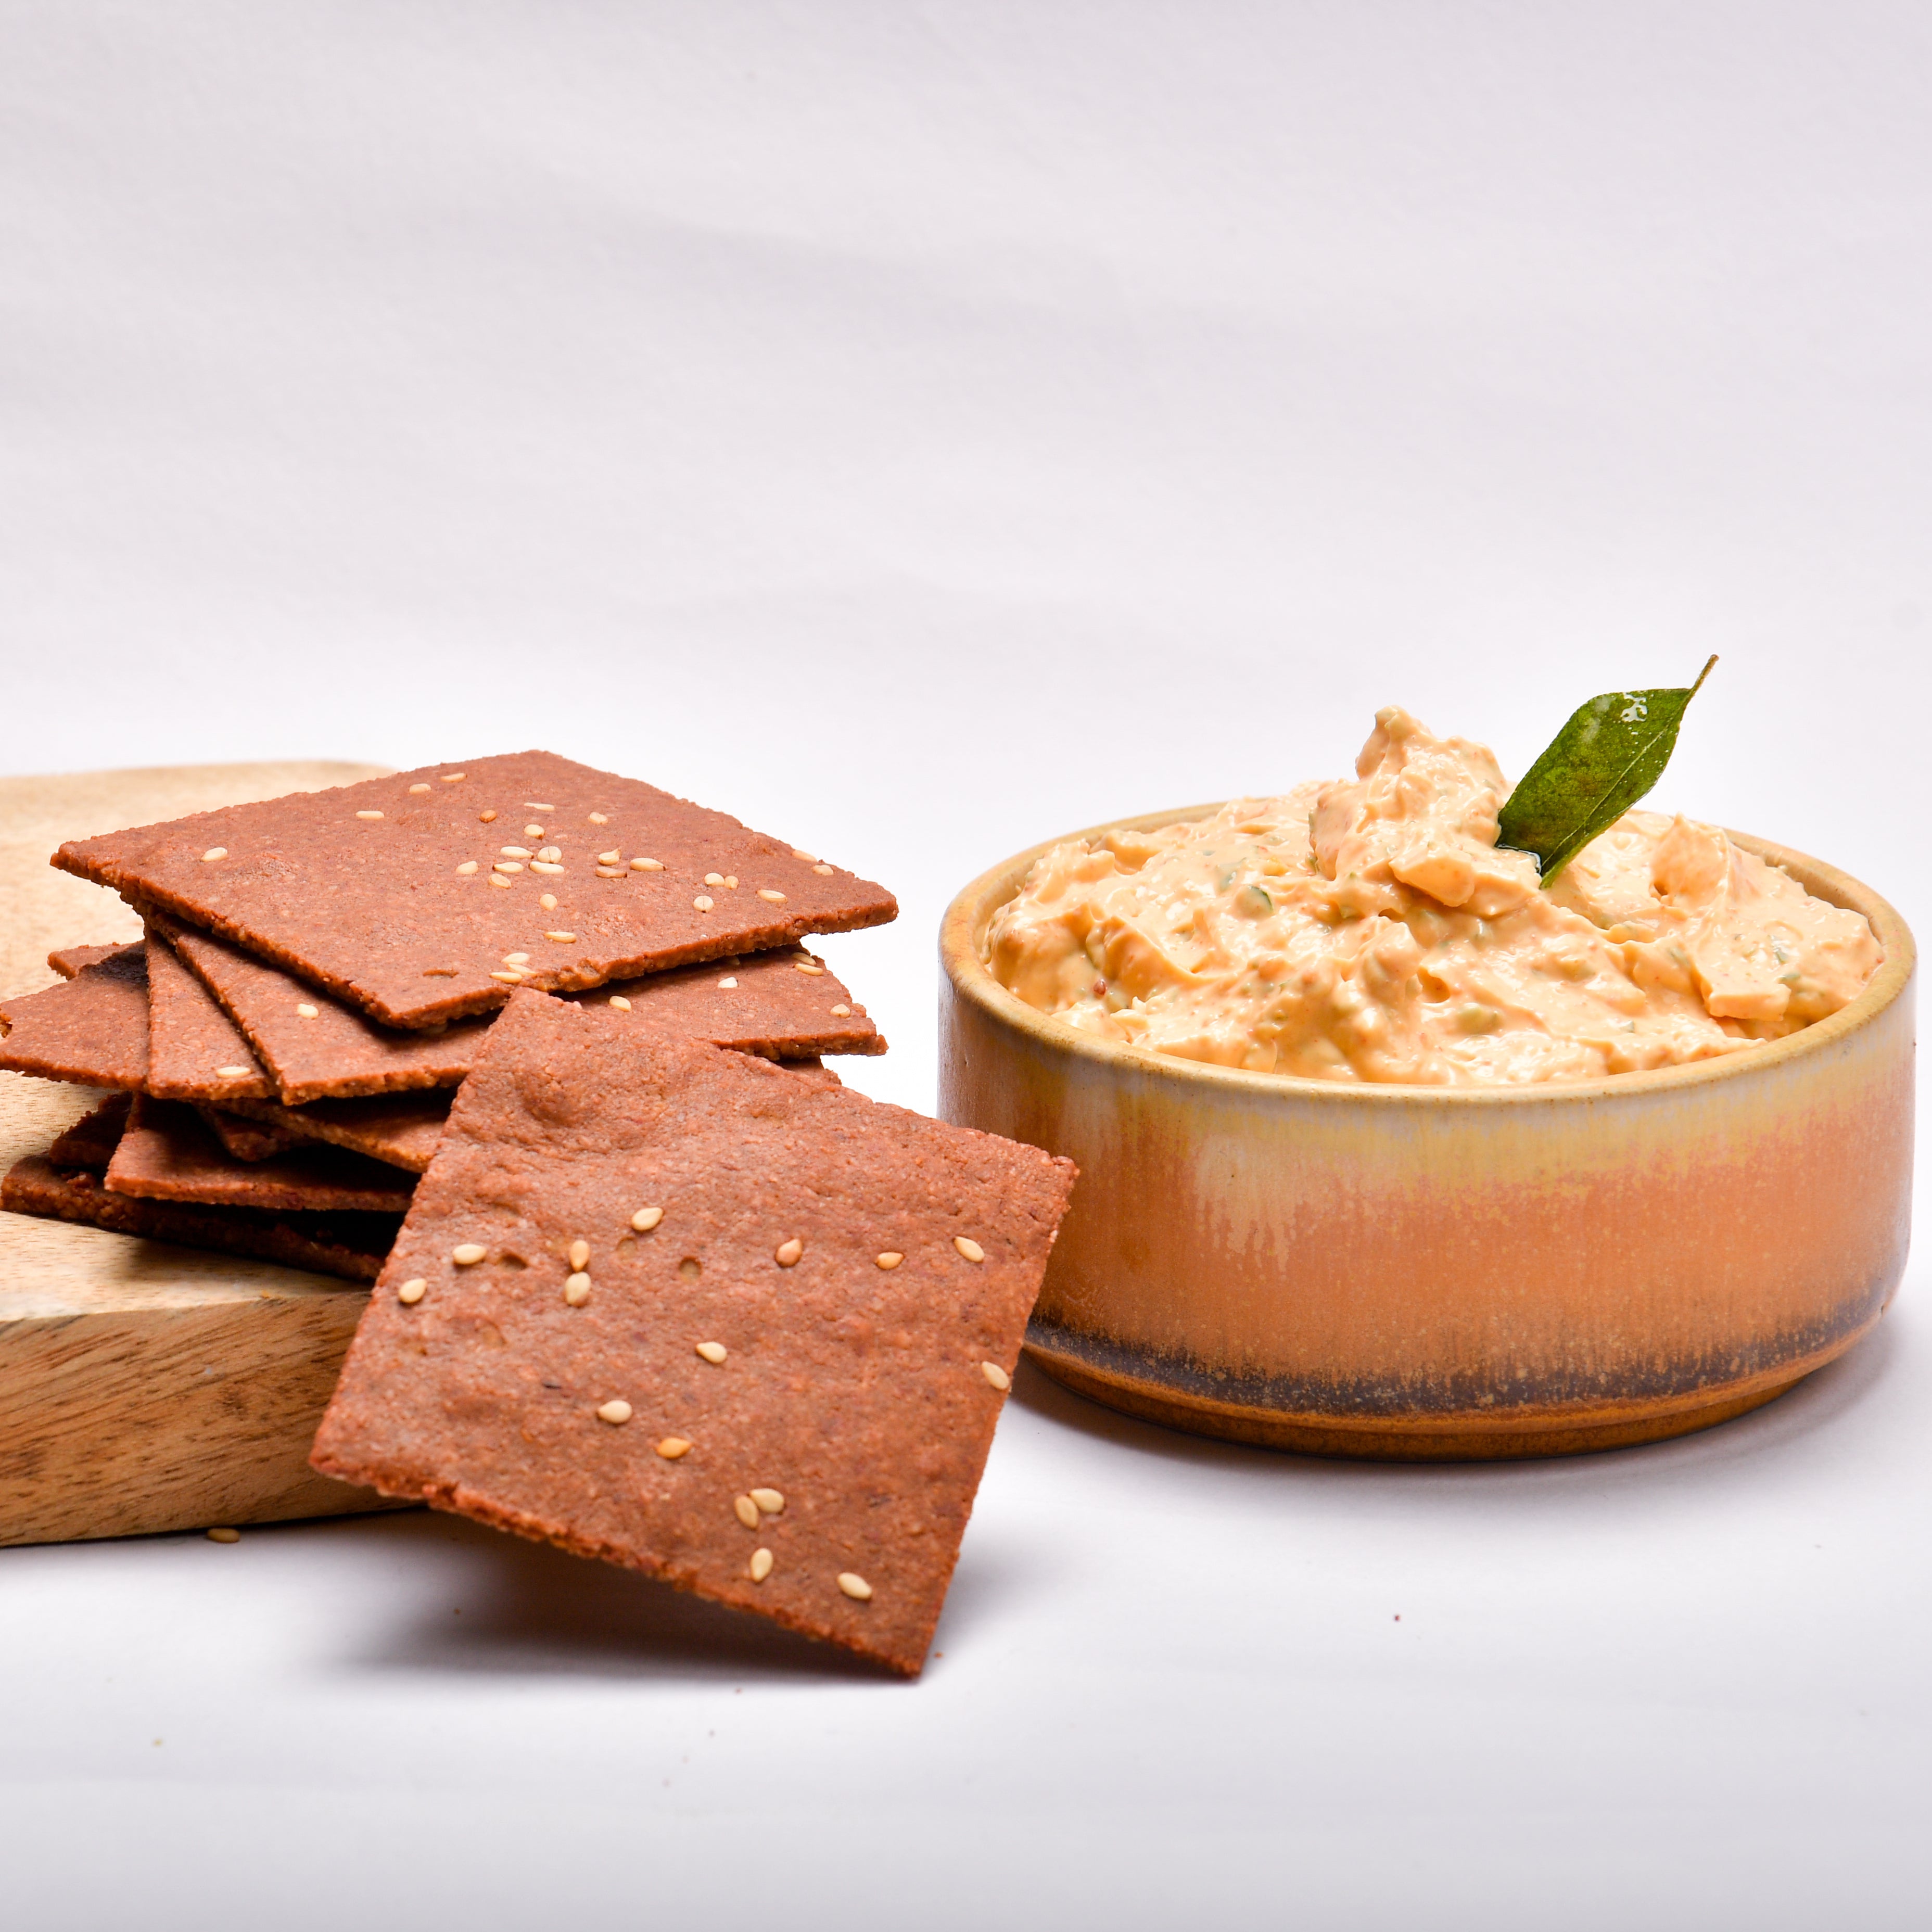 Beetroot crackers (12 pieces) with Curry Leaves Dip (150g)